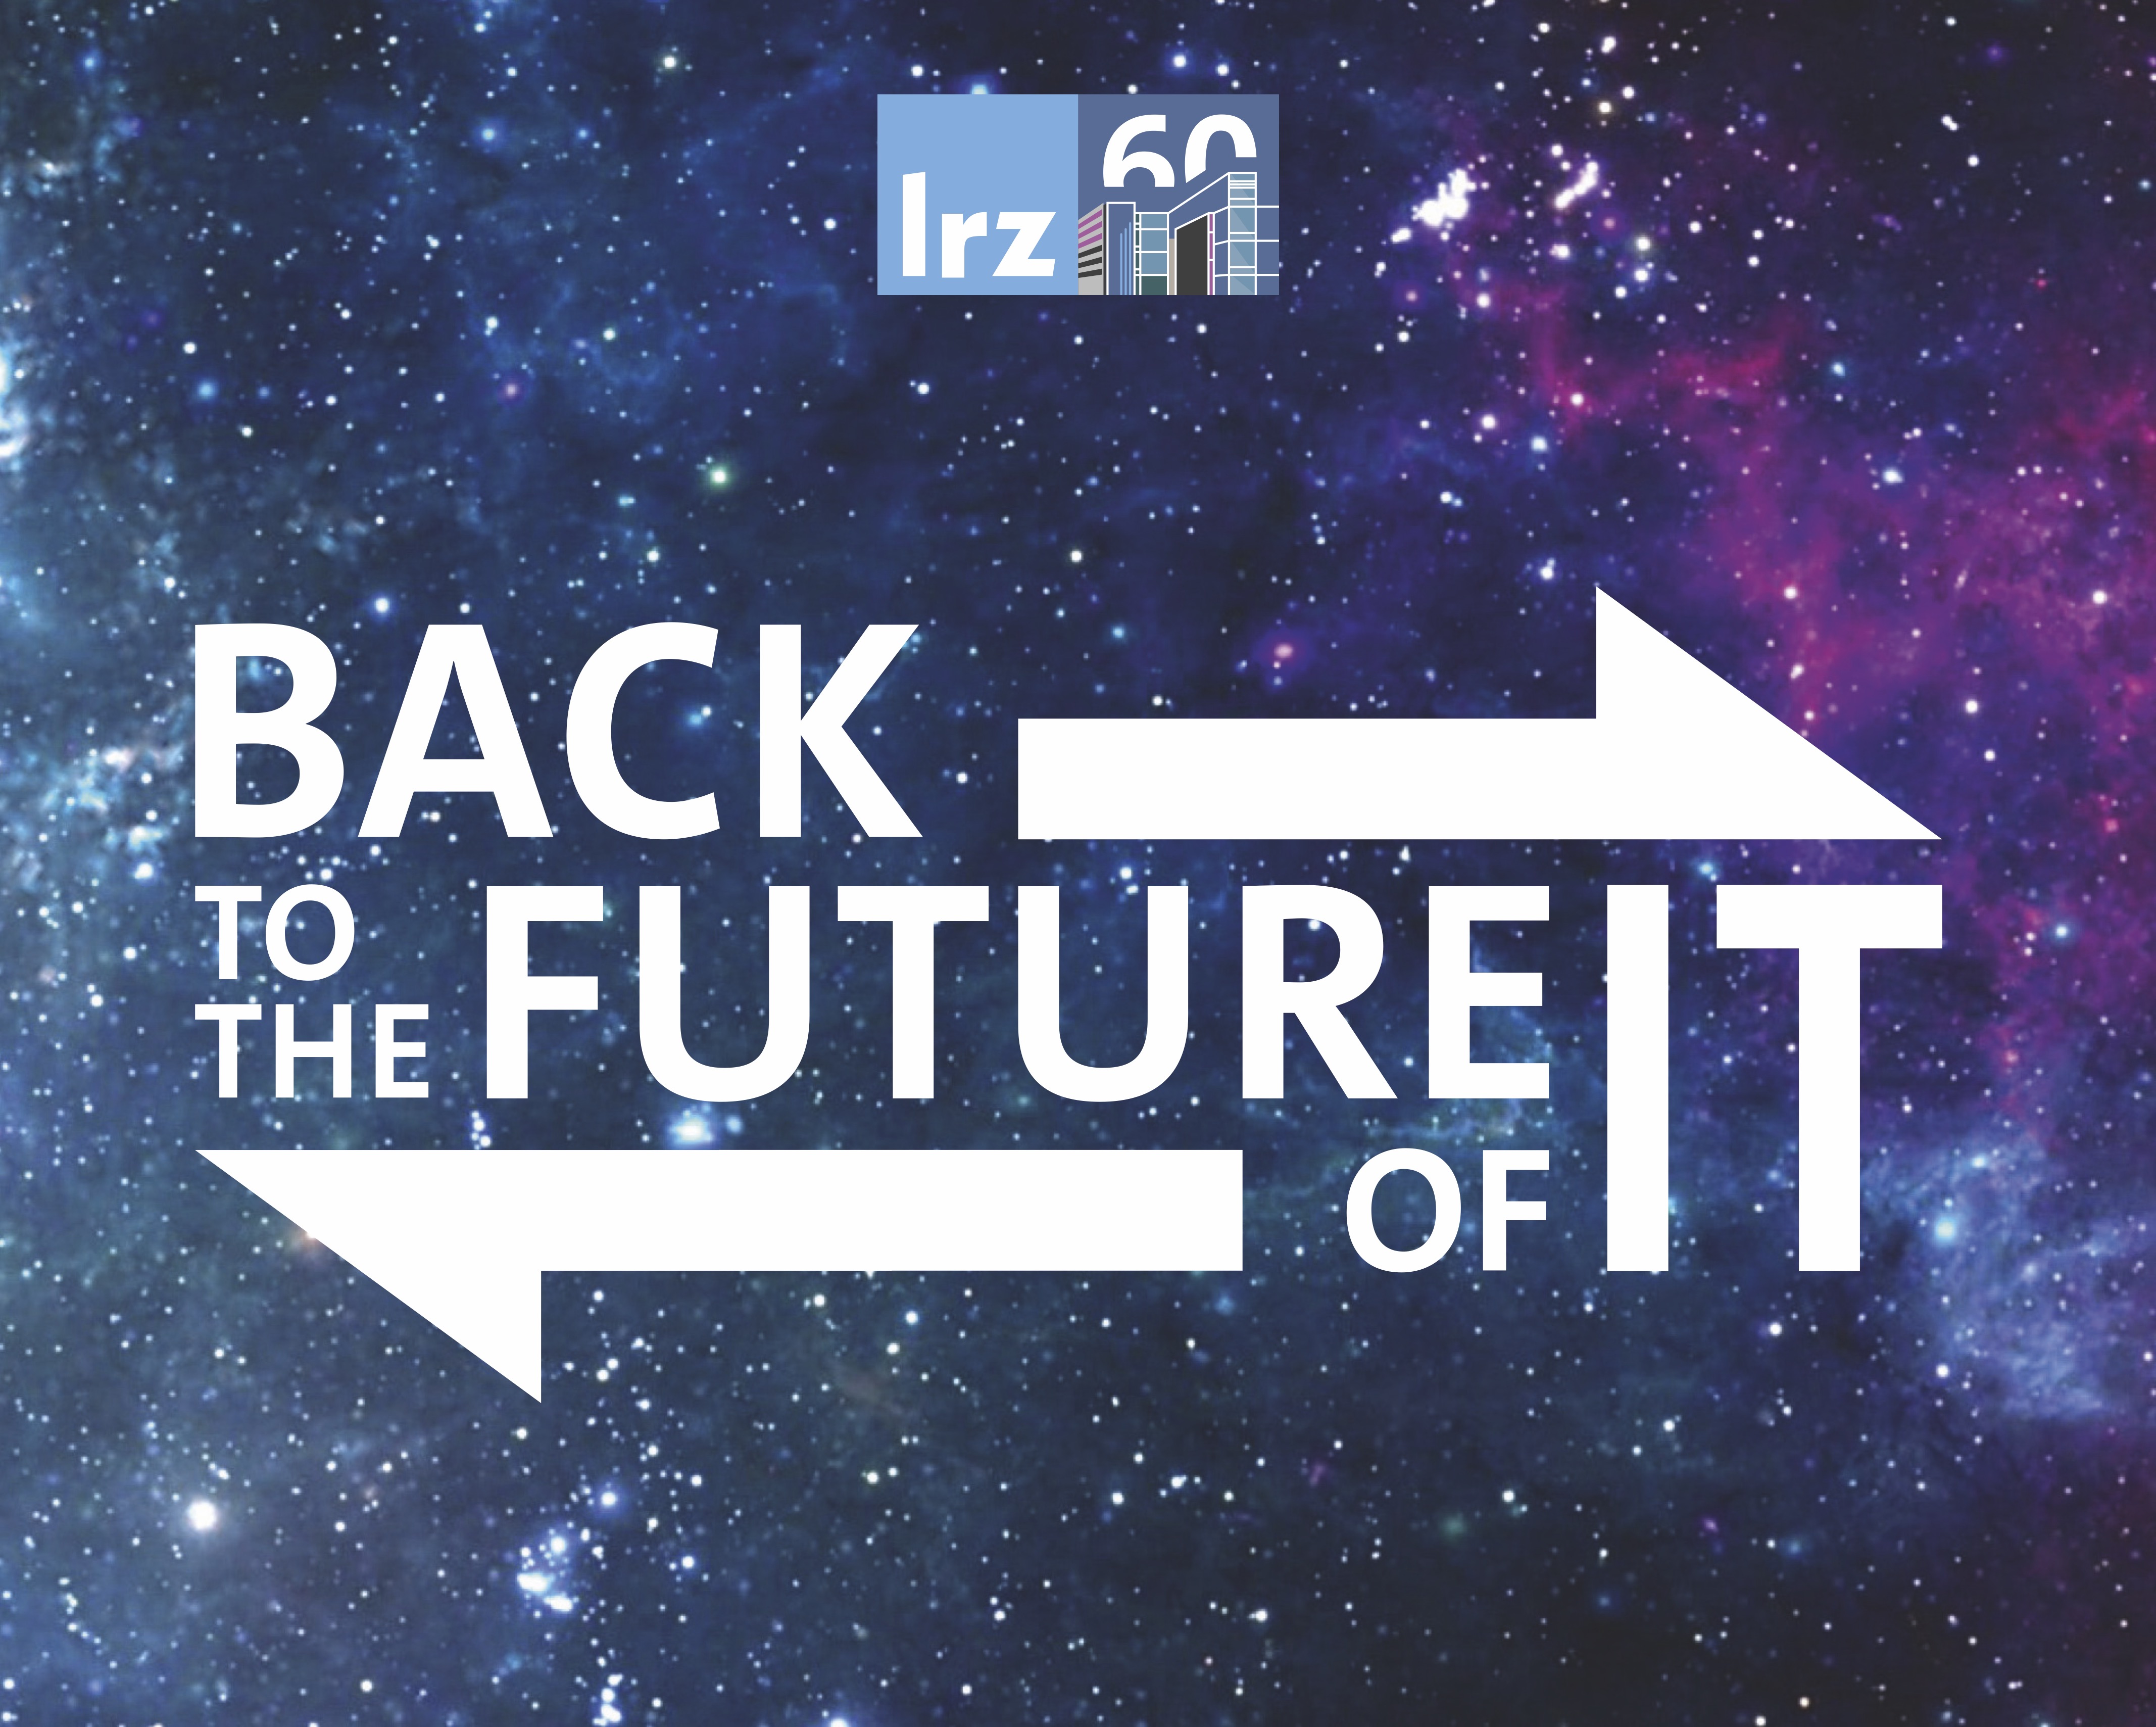 #TheFutureisNow: The motto for the celebrations around LRZ 60 spanned across the whole year